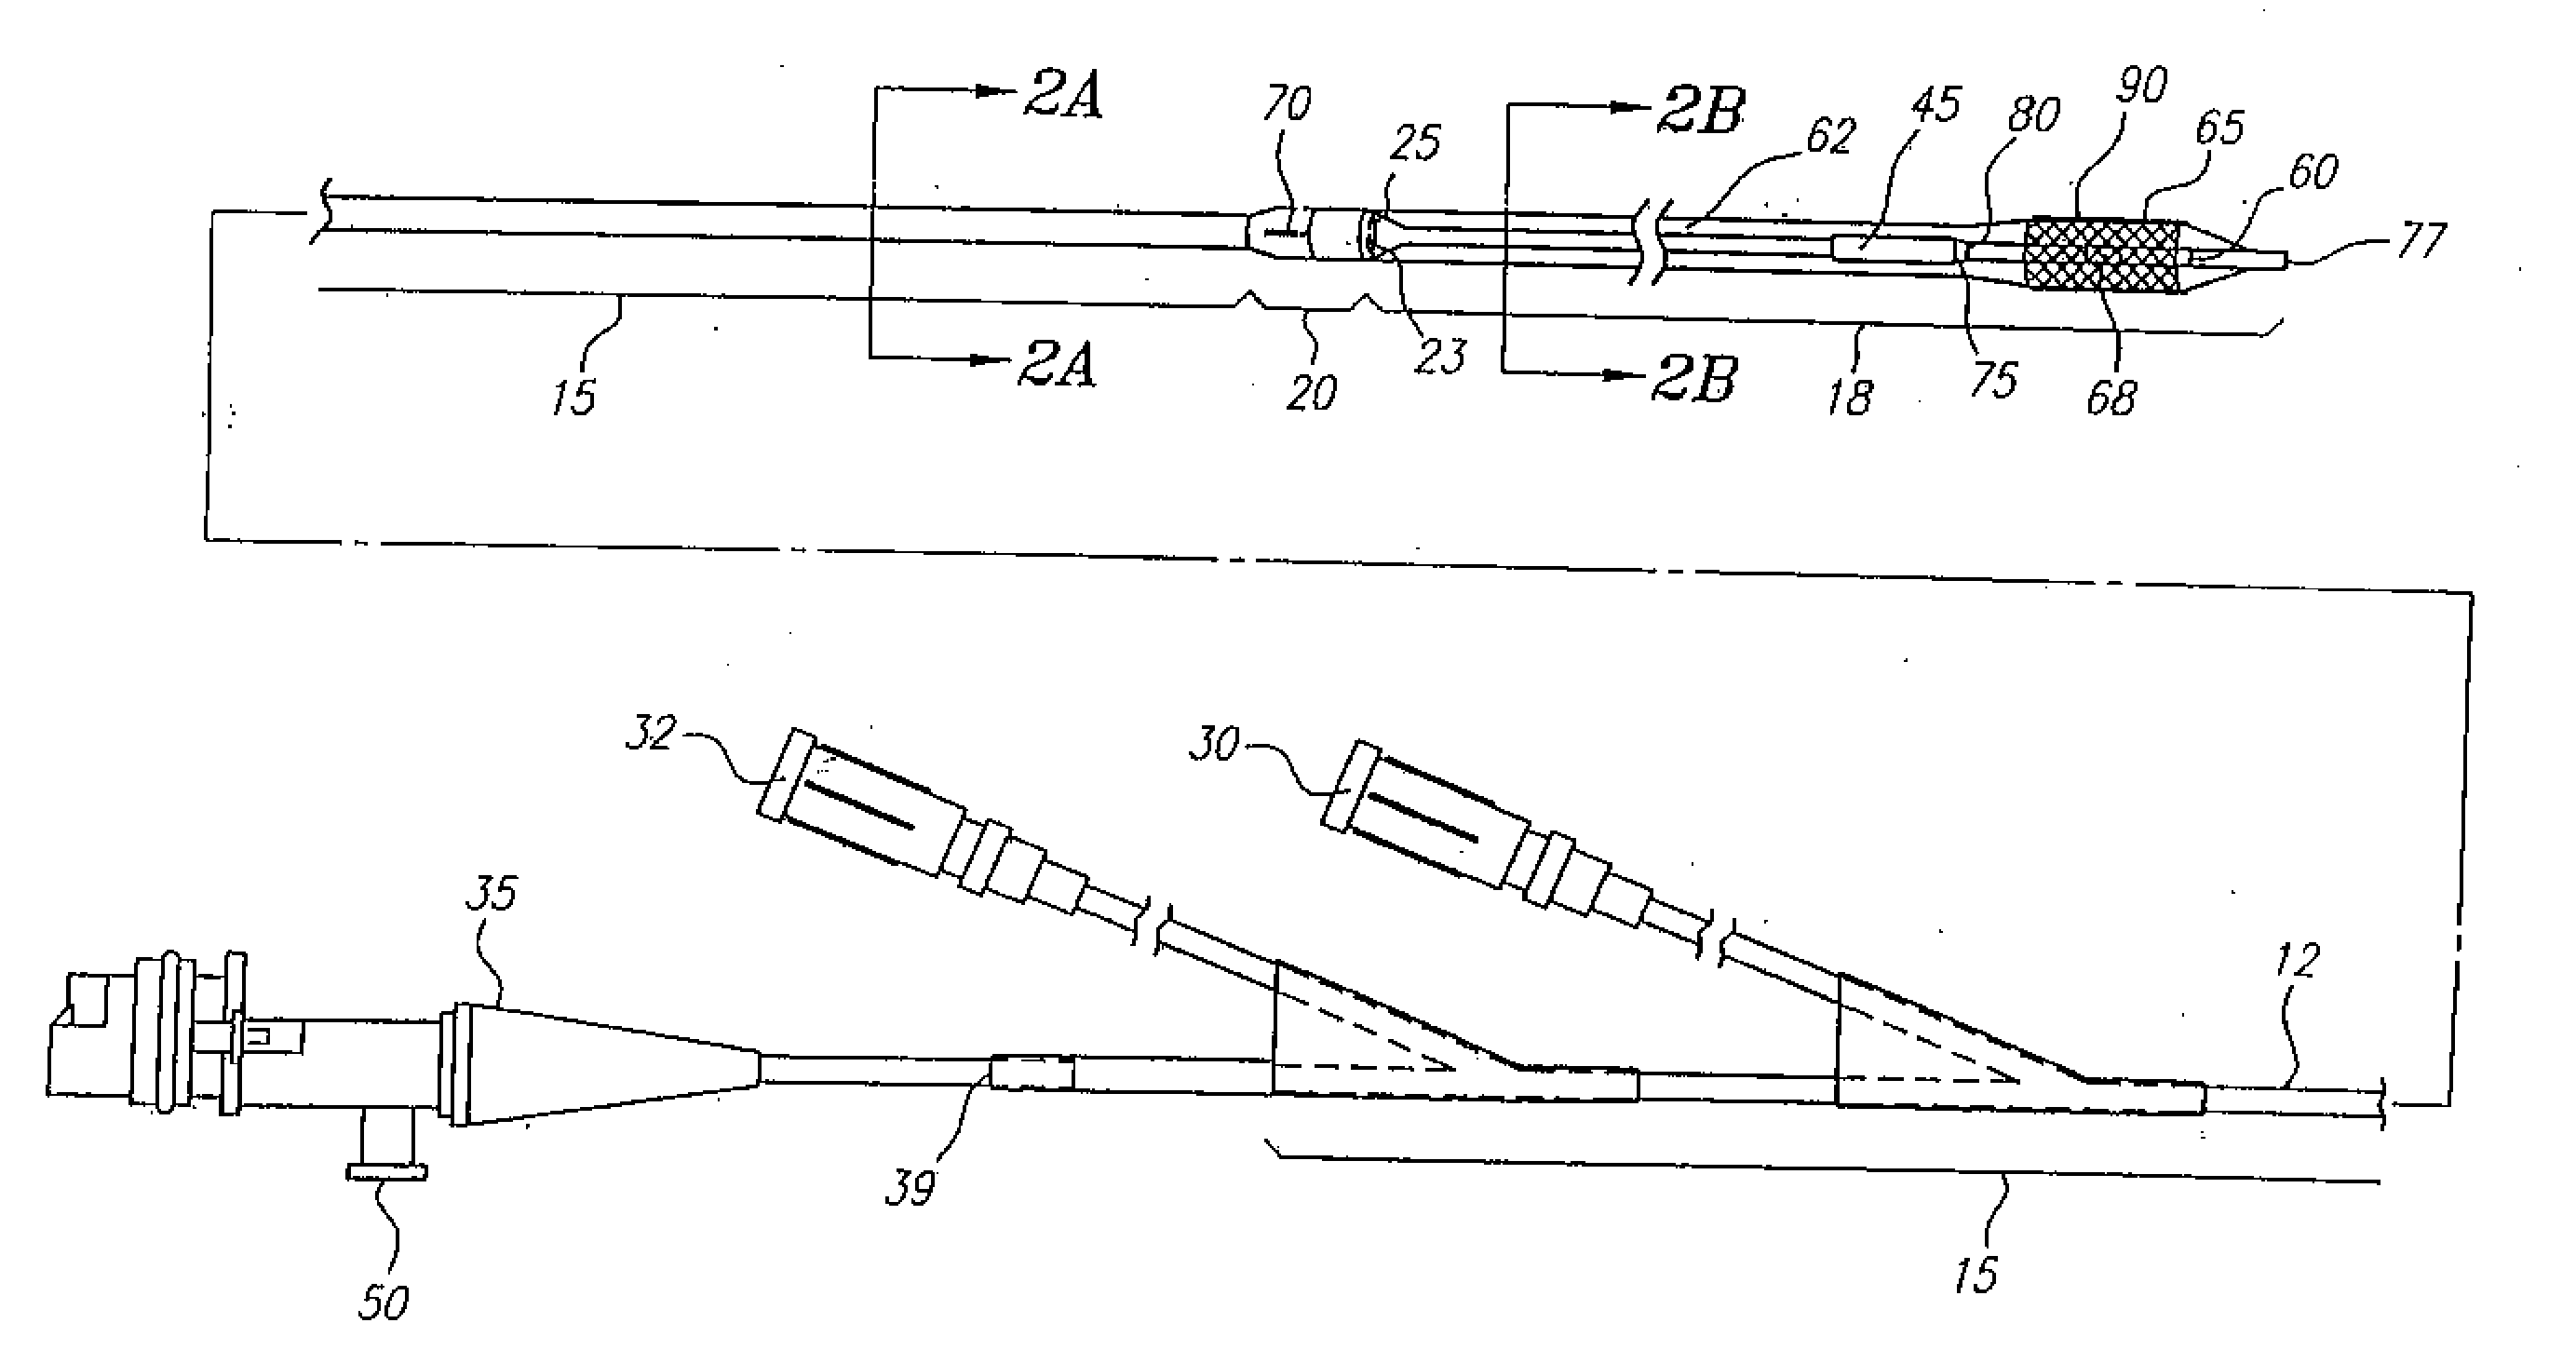 Catheter System Having Imaging, Balloon Angioplasty, And Stent Deployment Capabilities, And Method Of Use For Guided Stent Deployment